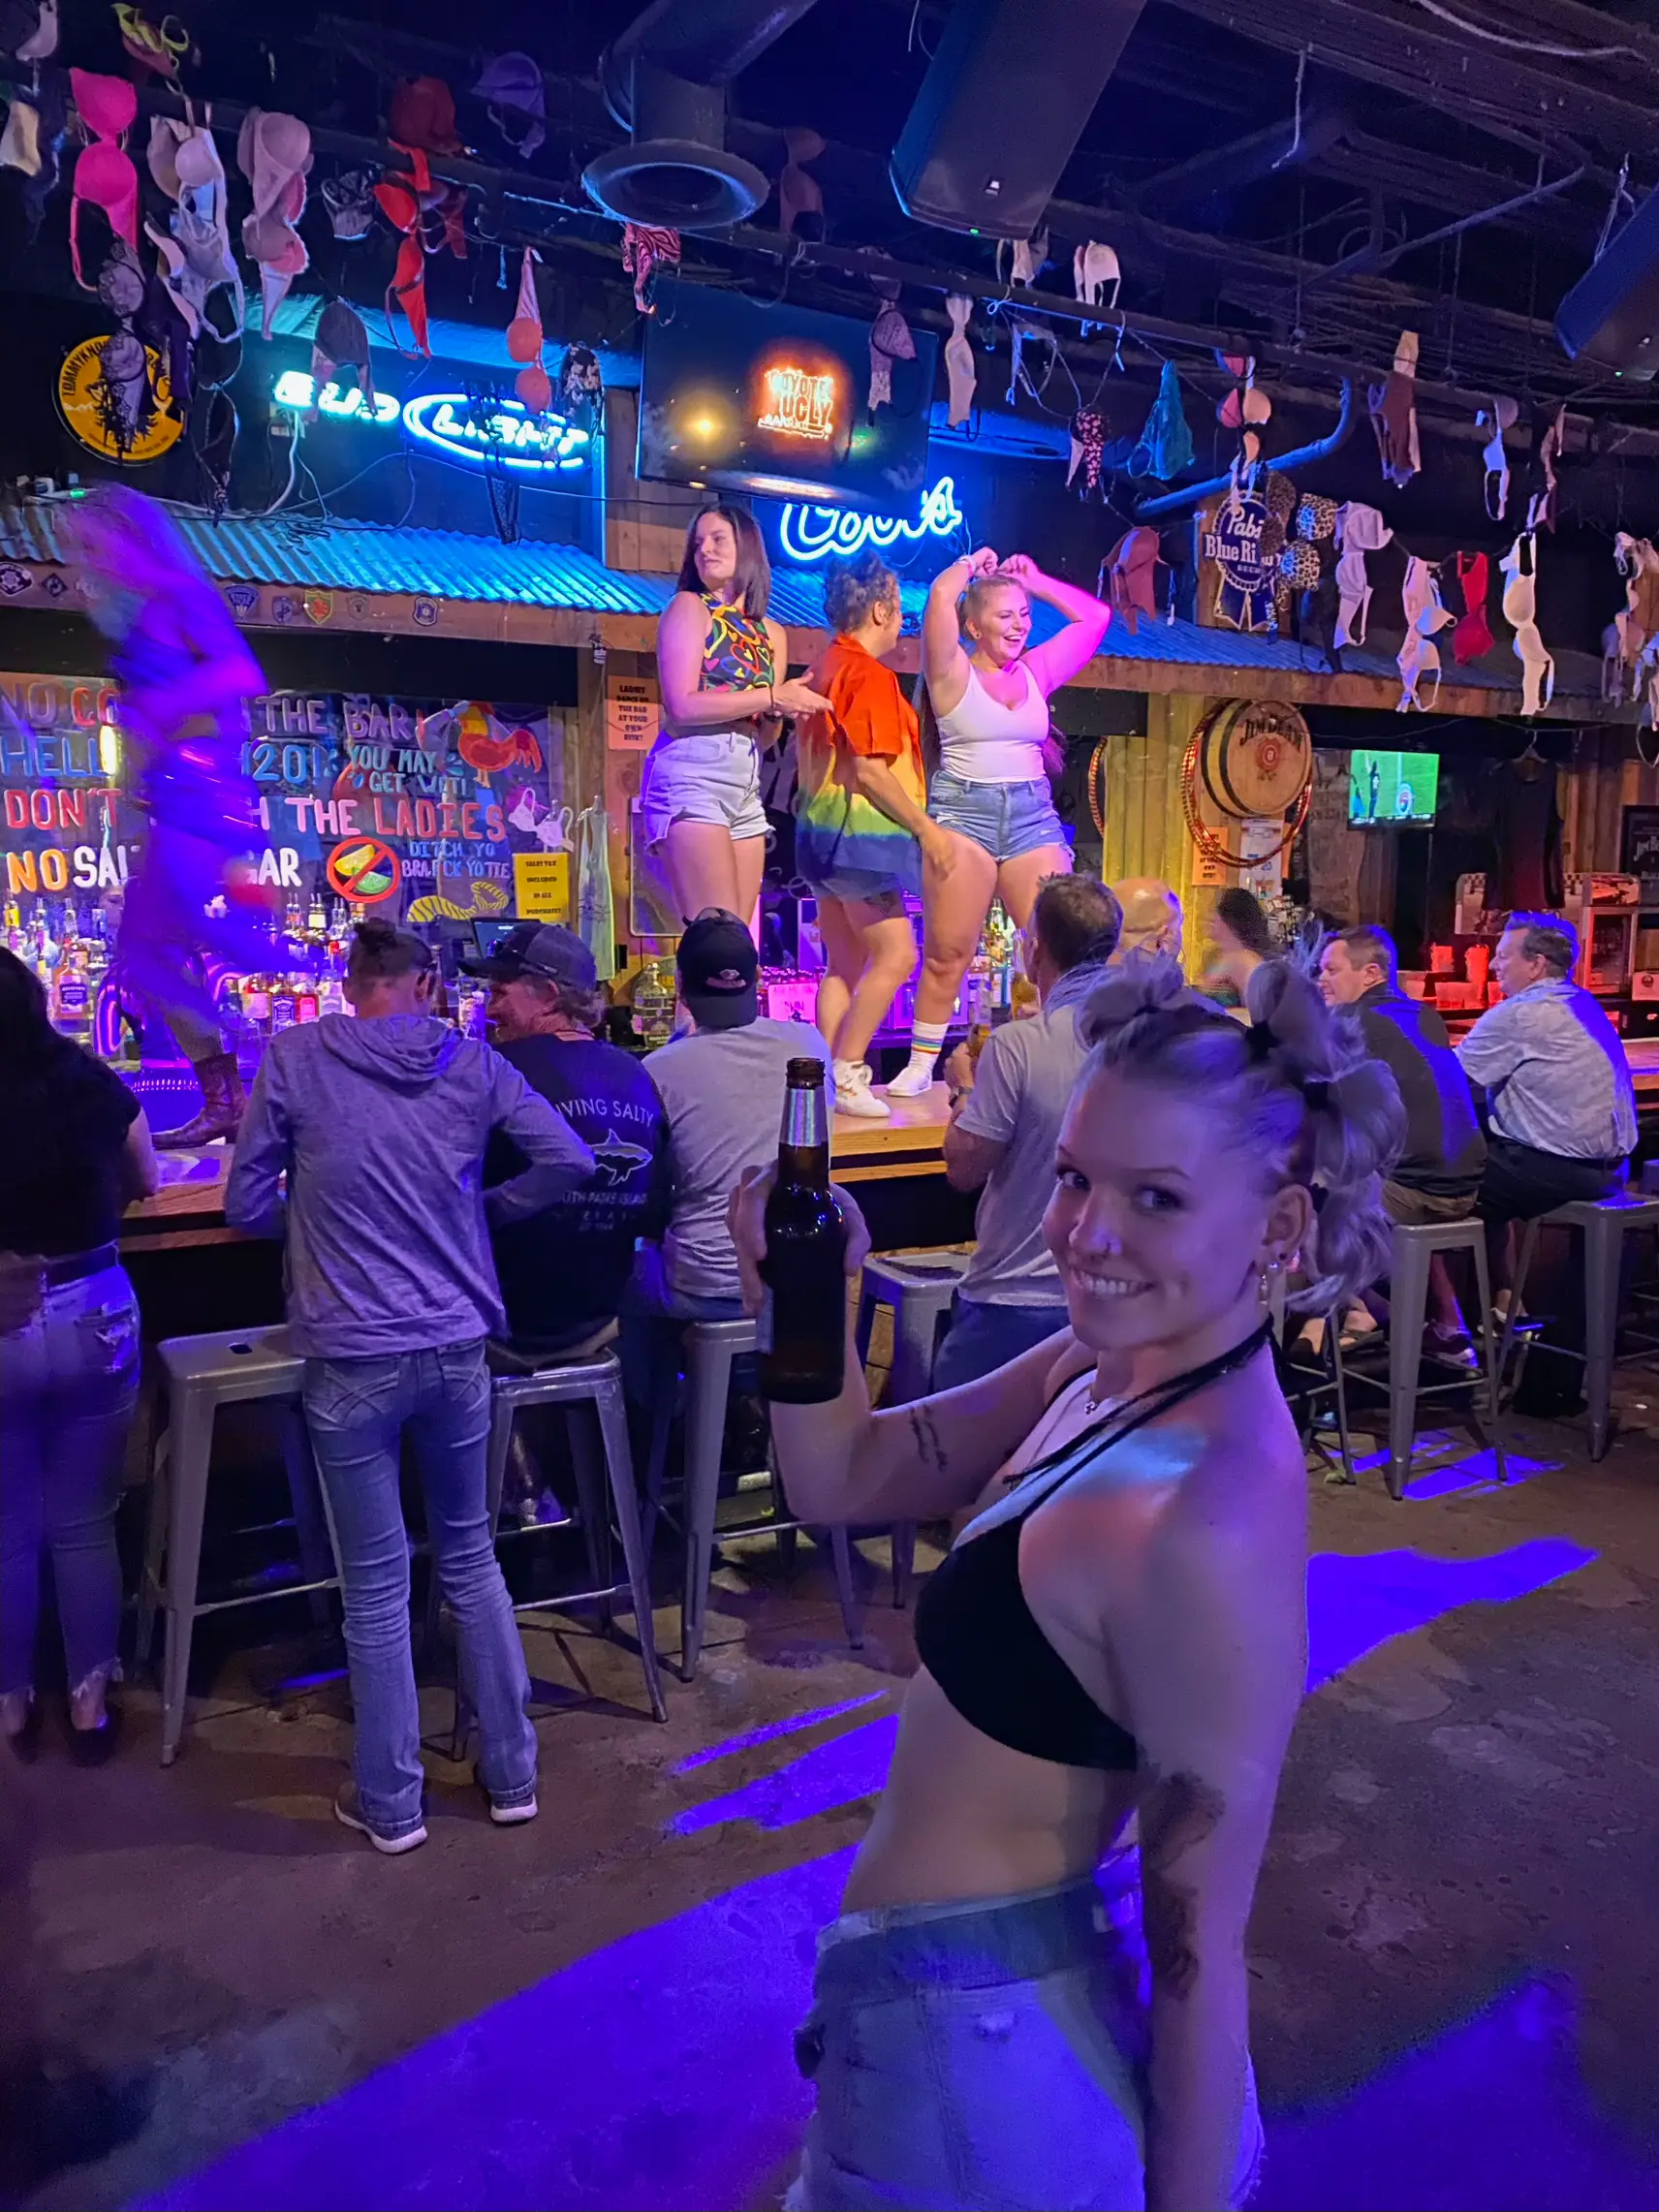  A woman in a bikini is standing in front of a bar